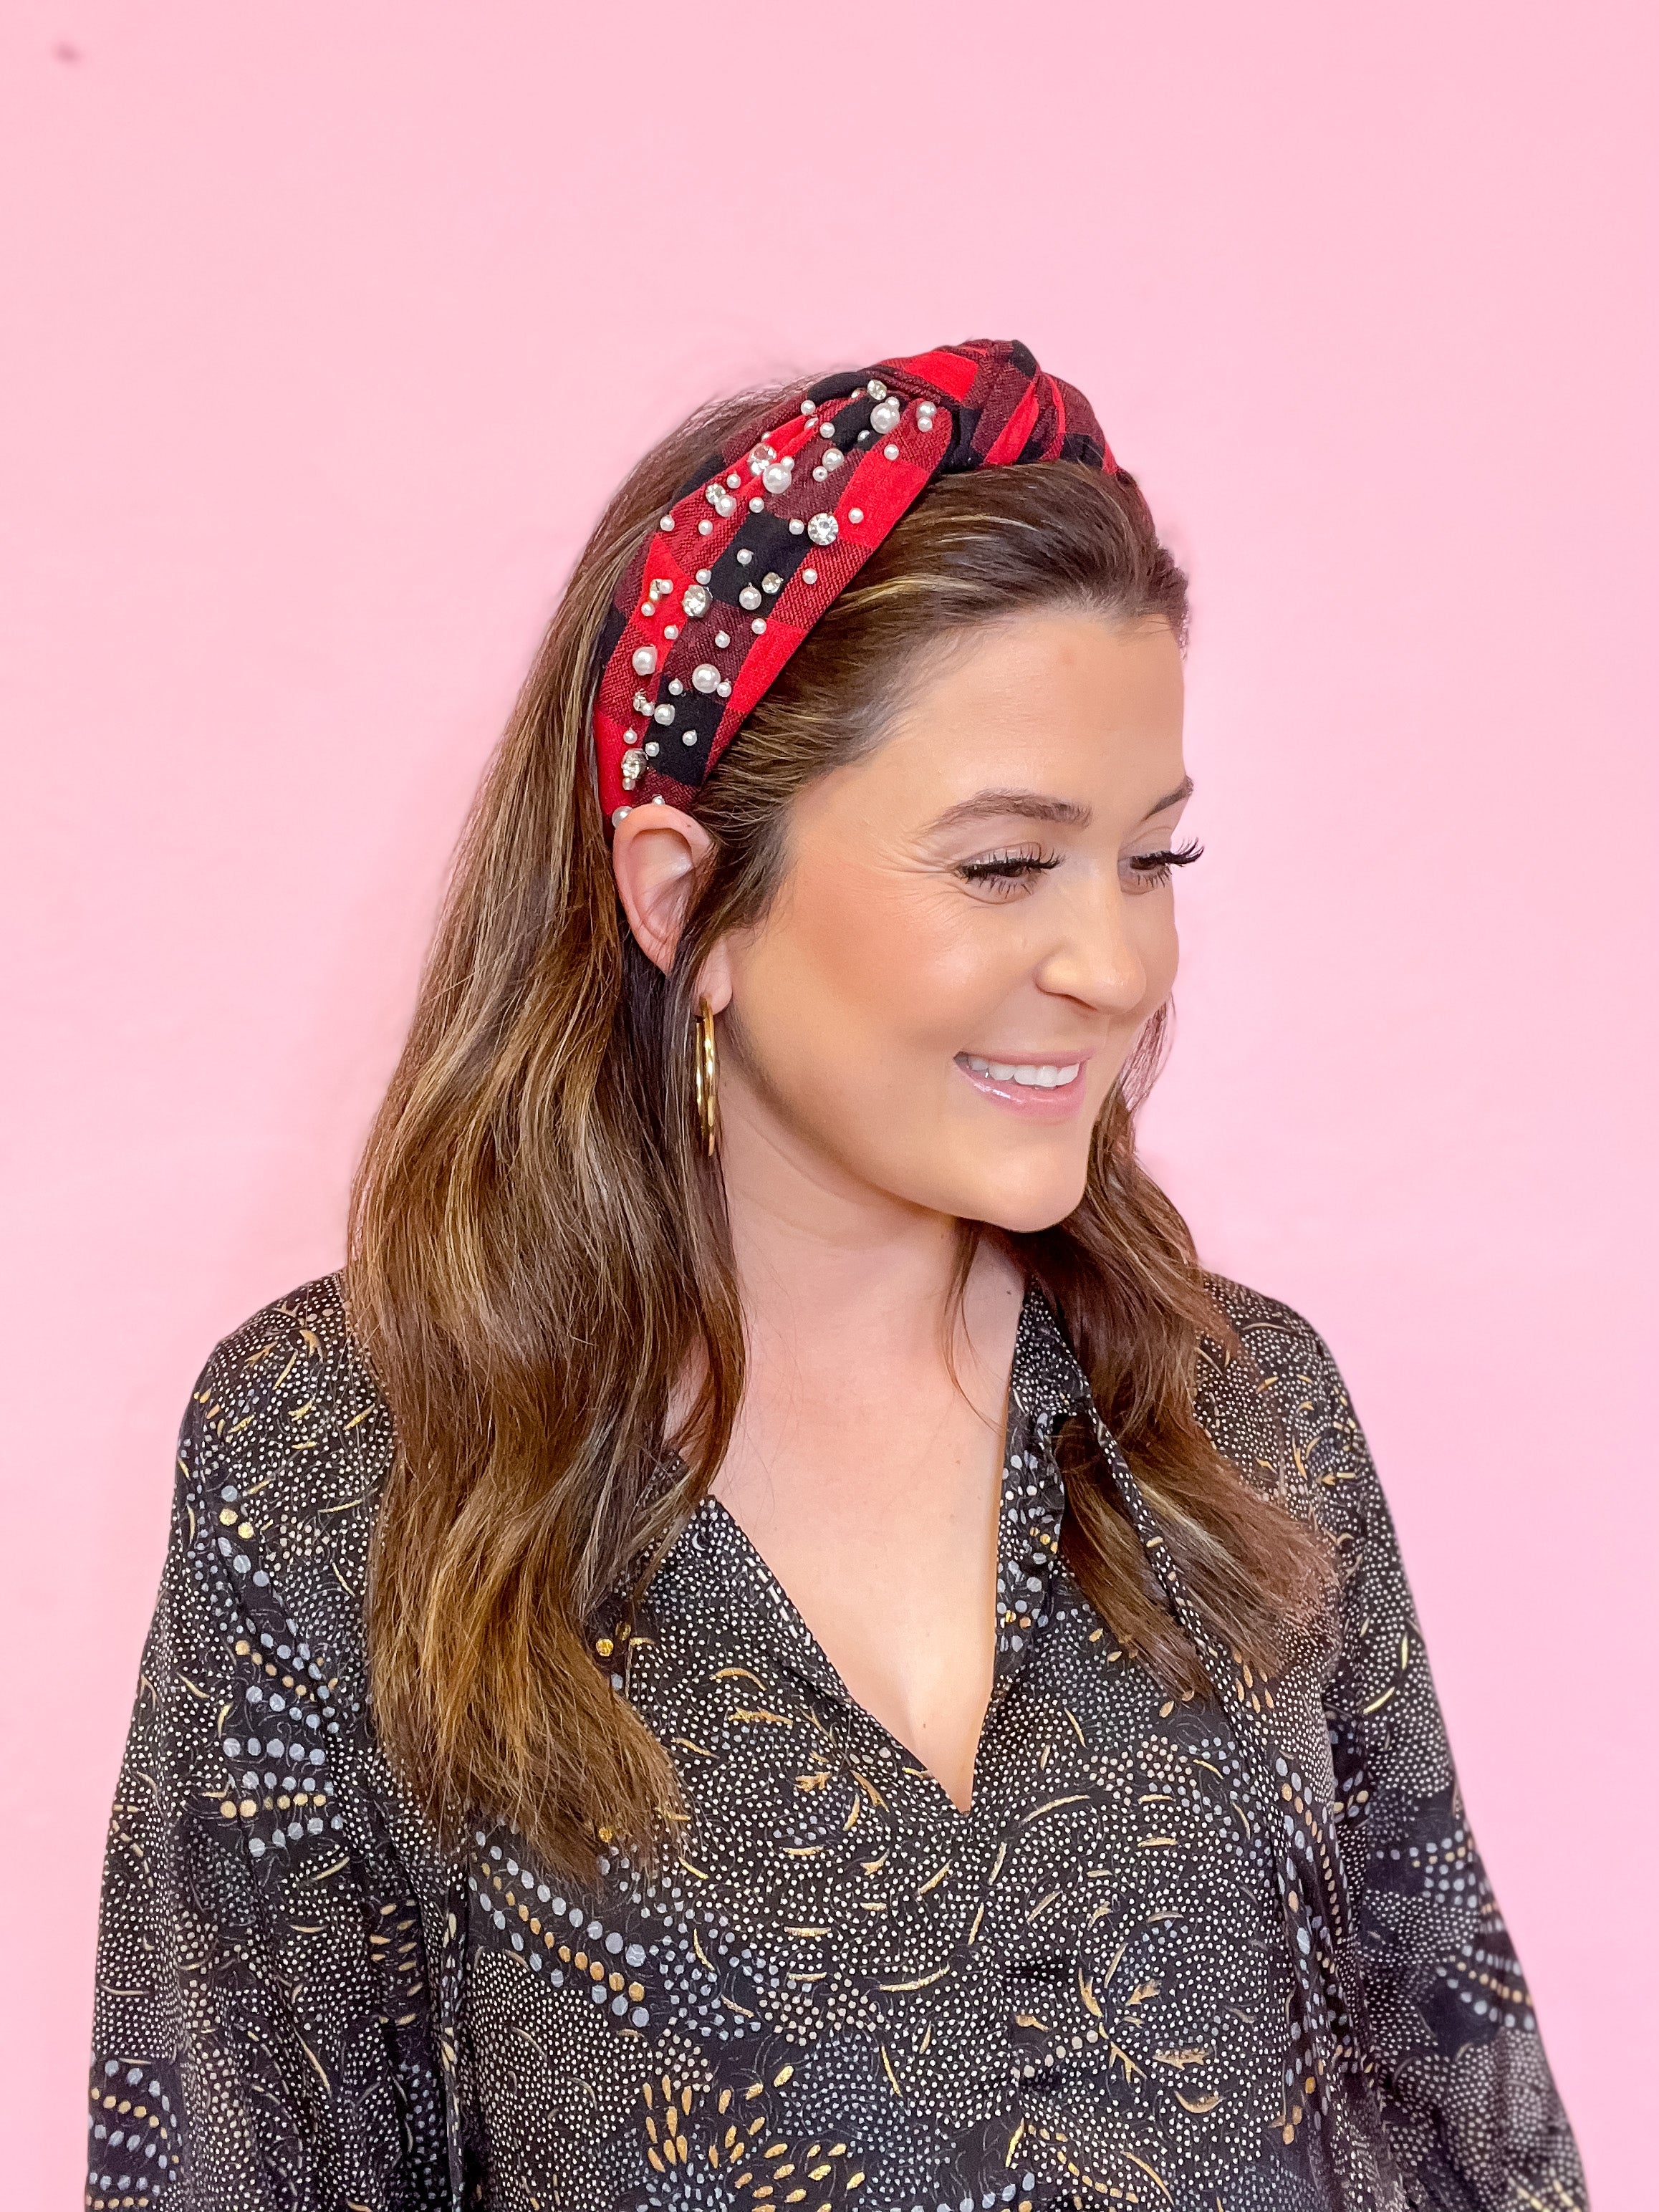 Buffalo Plaid Knotted Headband with Pearls